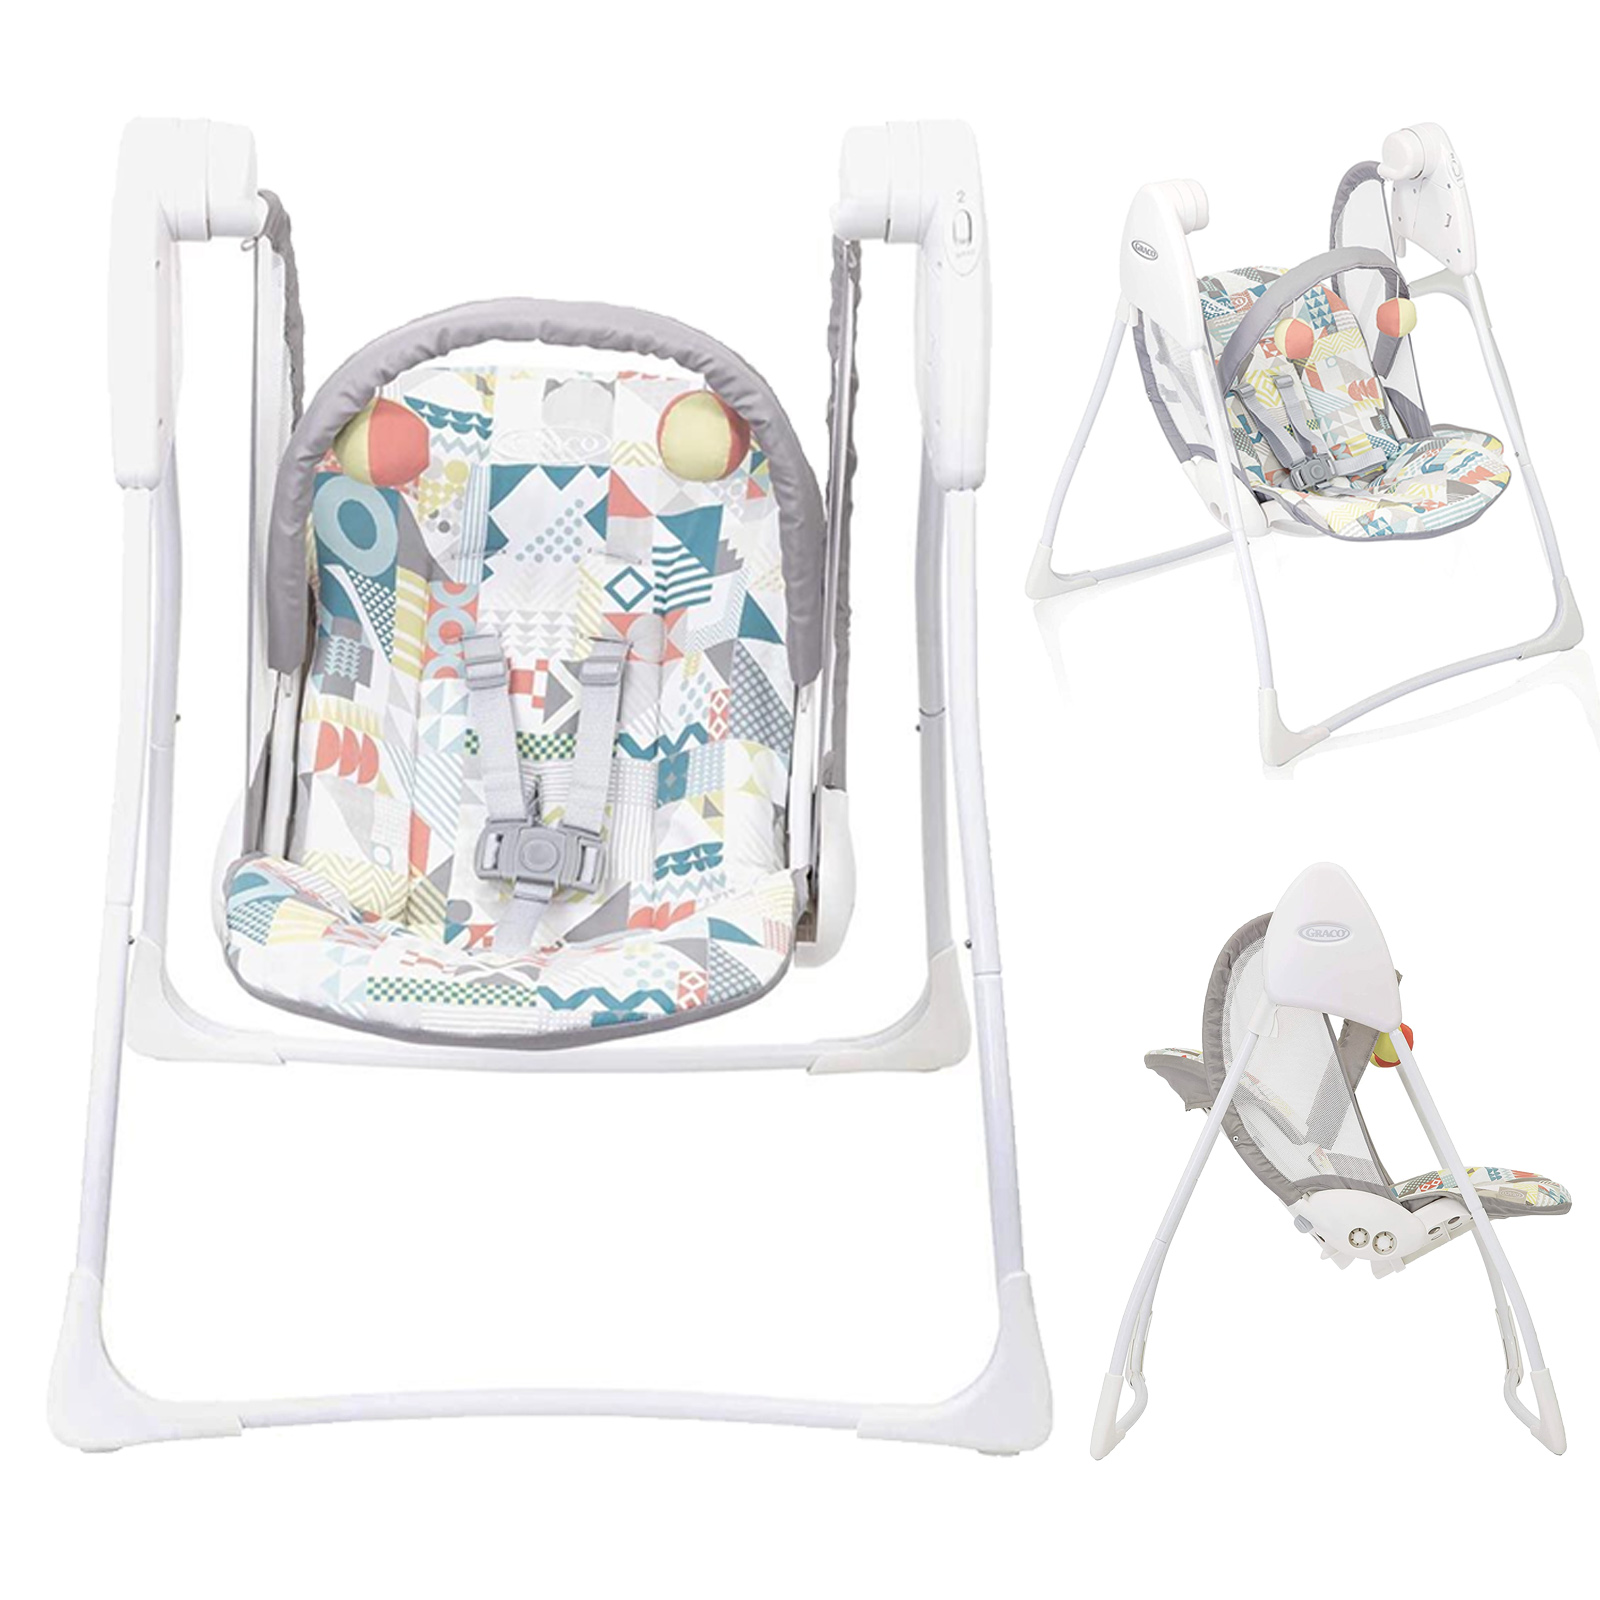 Graco Baby Delight Swing - Patchwork 